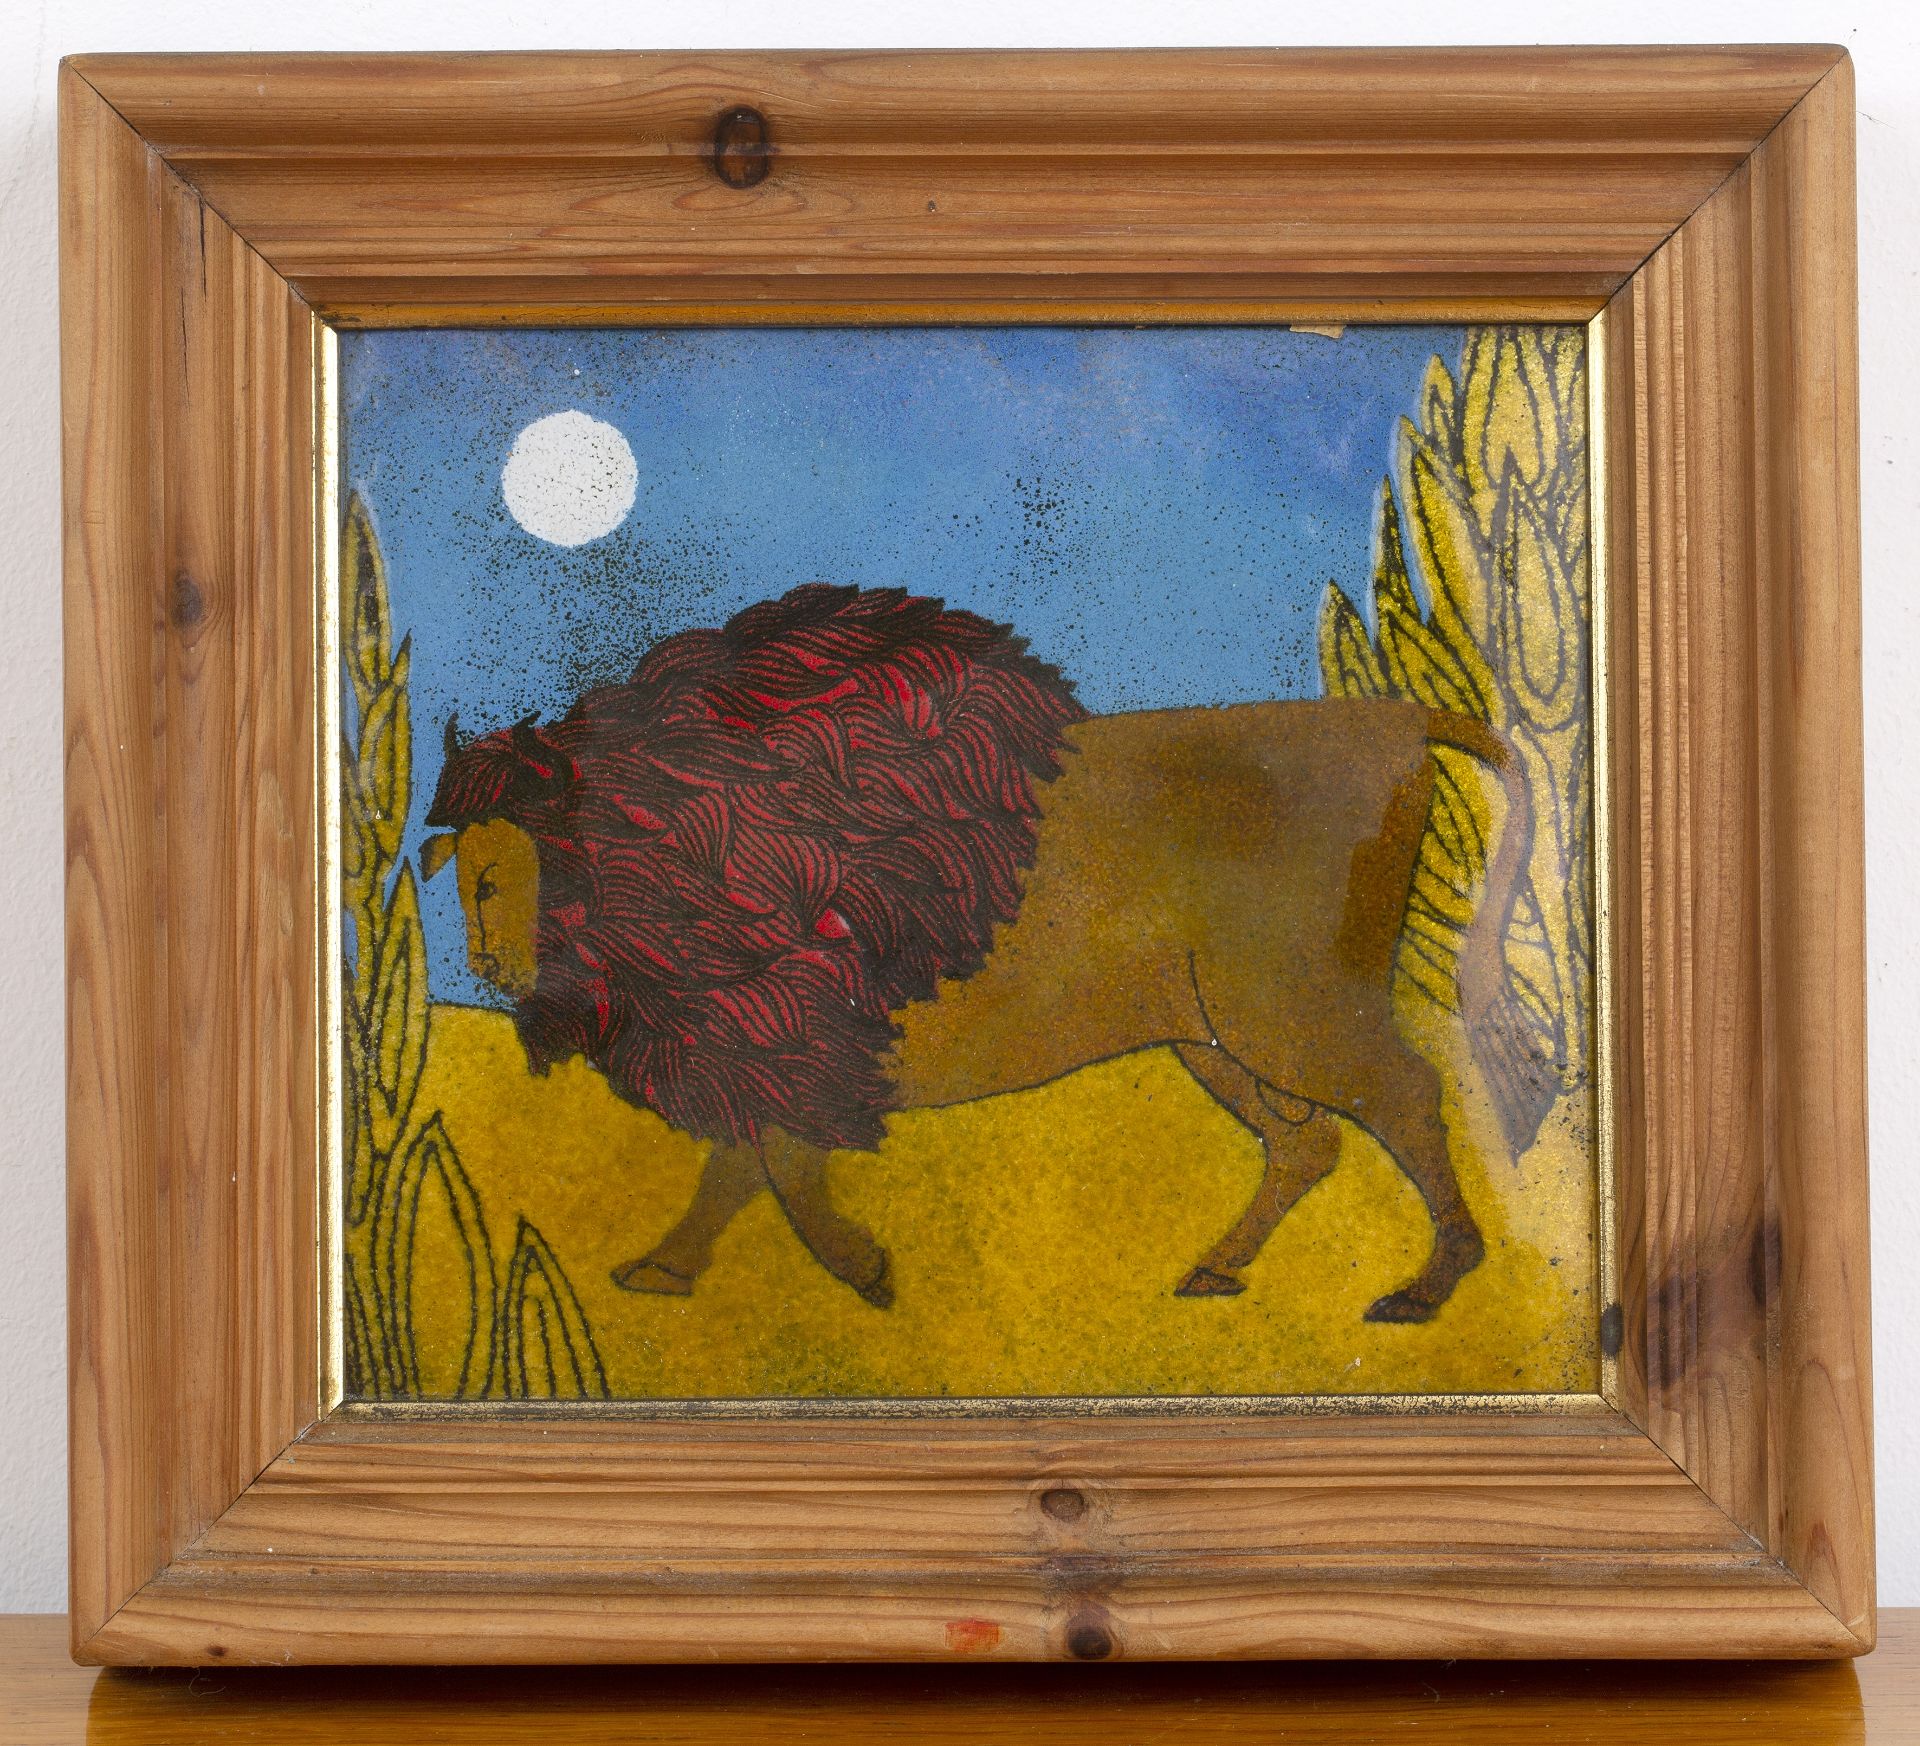 Beryl Turpin (1926-2016) 'Bison', enamel on copper, unsigned, in pine frame, panel itself measures